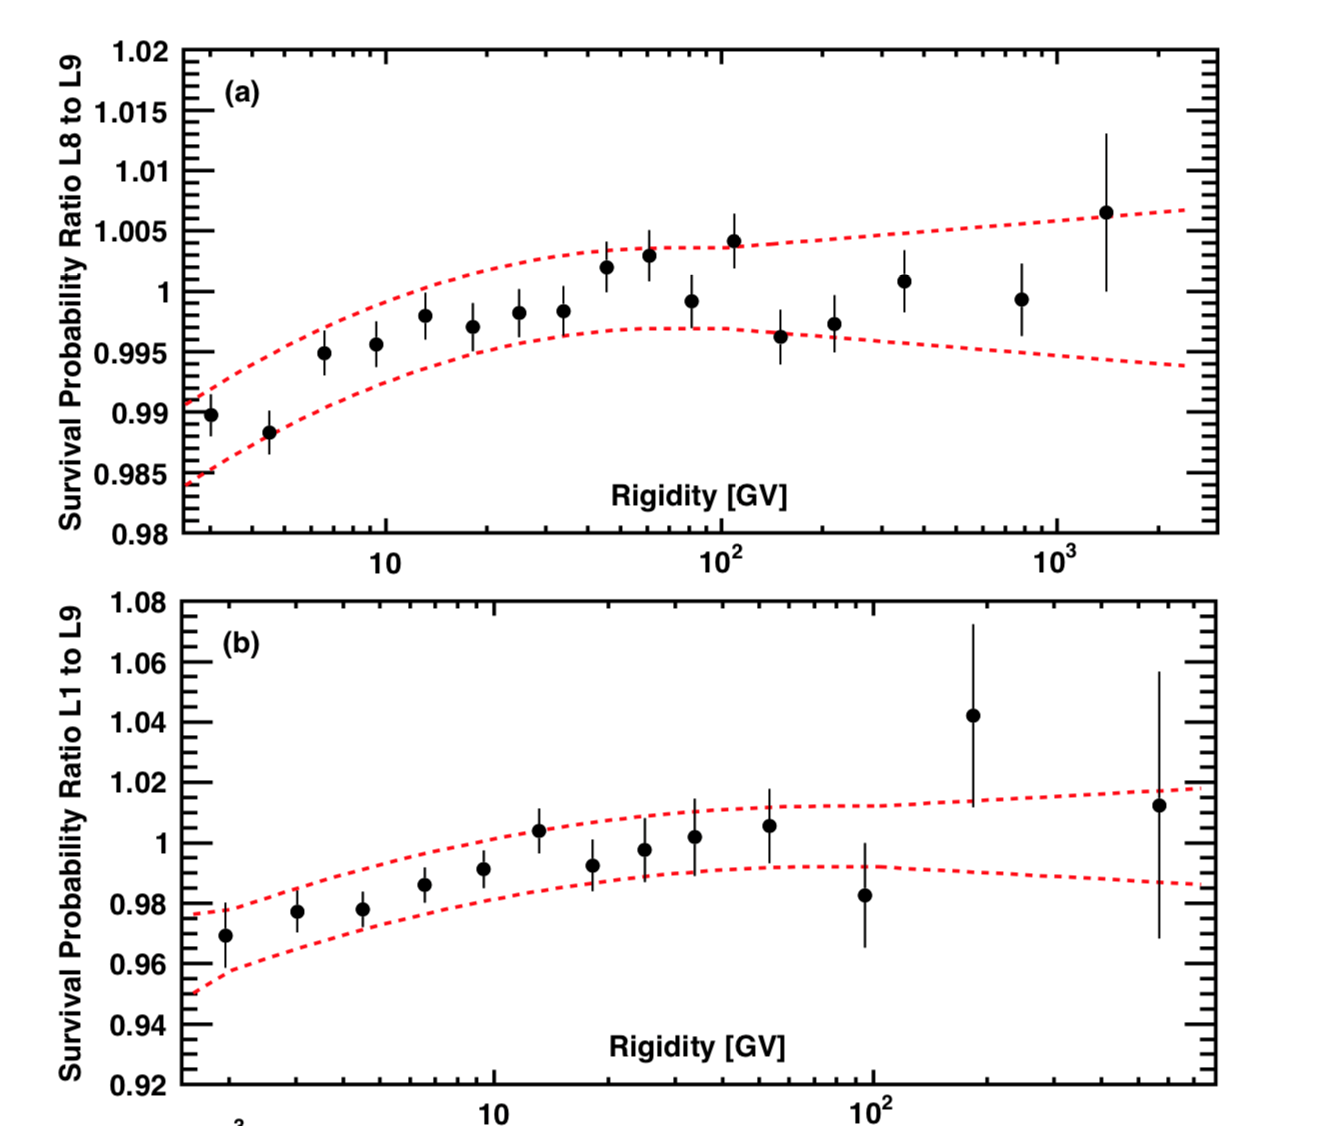  (a) Ratio of the He survival probabilities from L8 to L9 for the simulation to the data when traversing the lower TOF and RICH versus rigidity. (b) Ratio of the He survival probabilities from L1 to L9 between the simulation and the data when traversing the entire detector versus rigidity. 